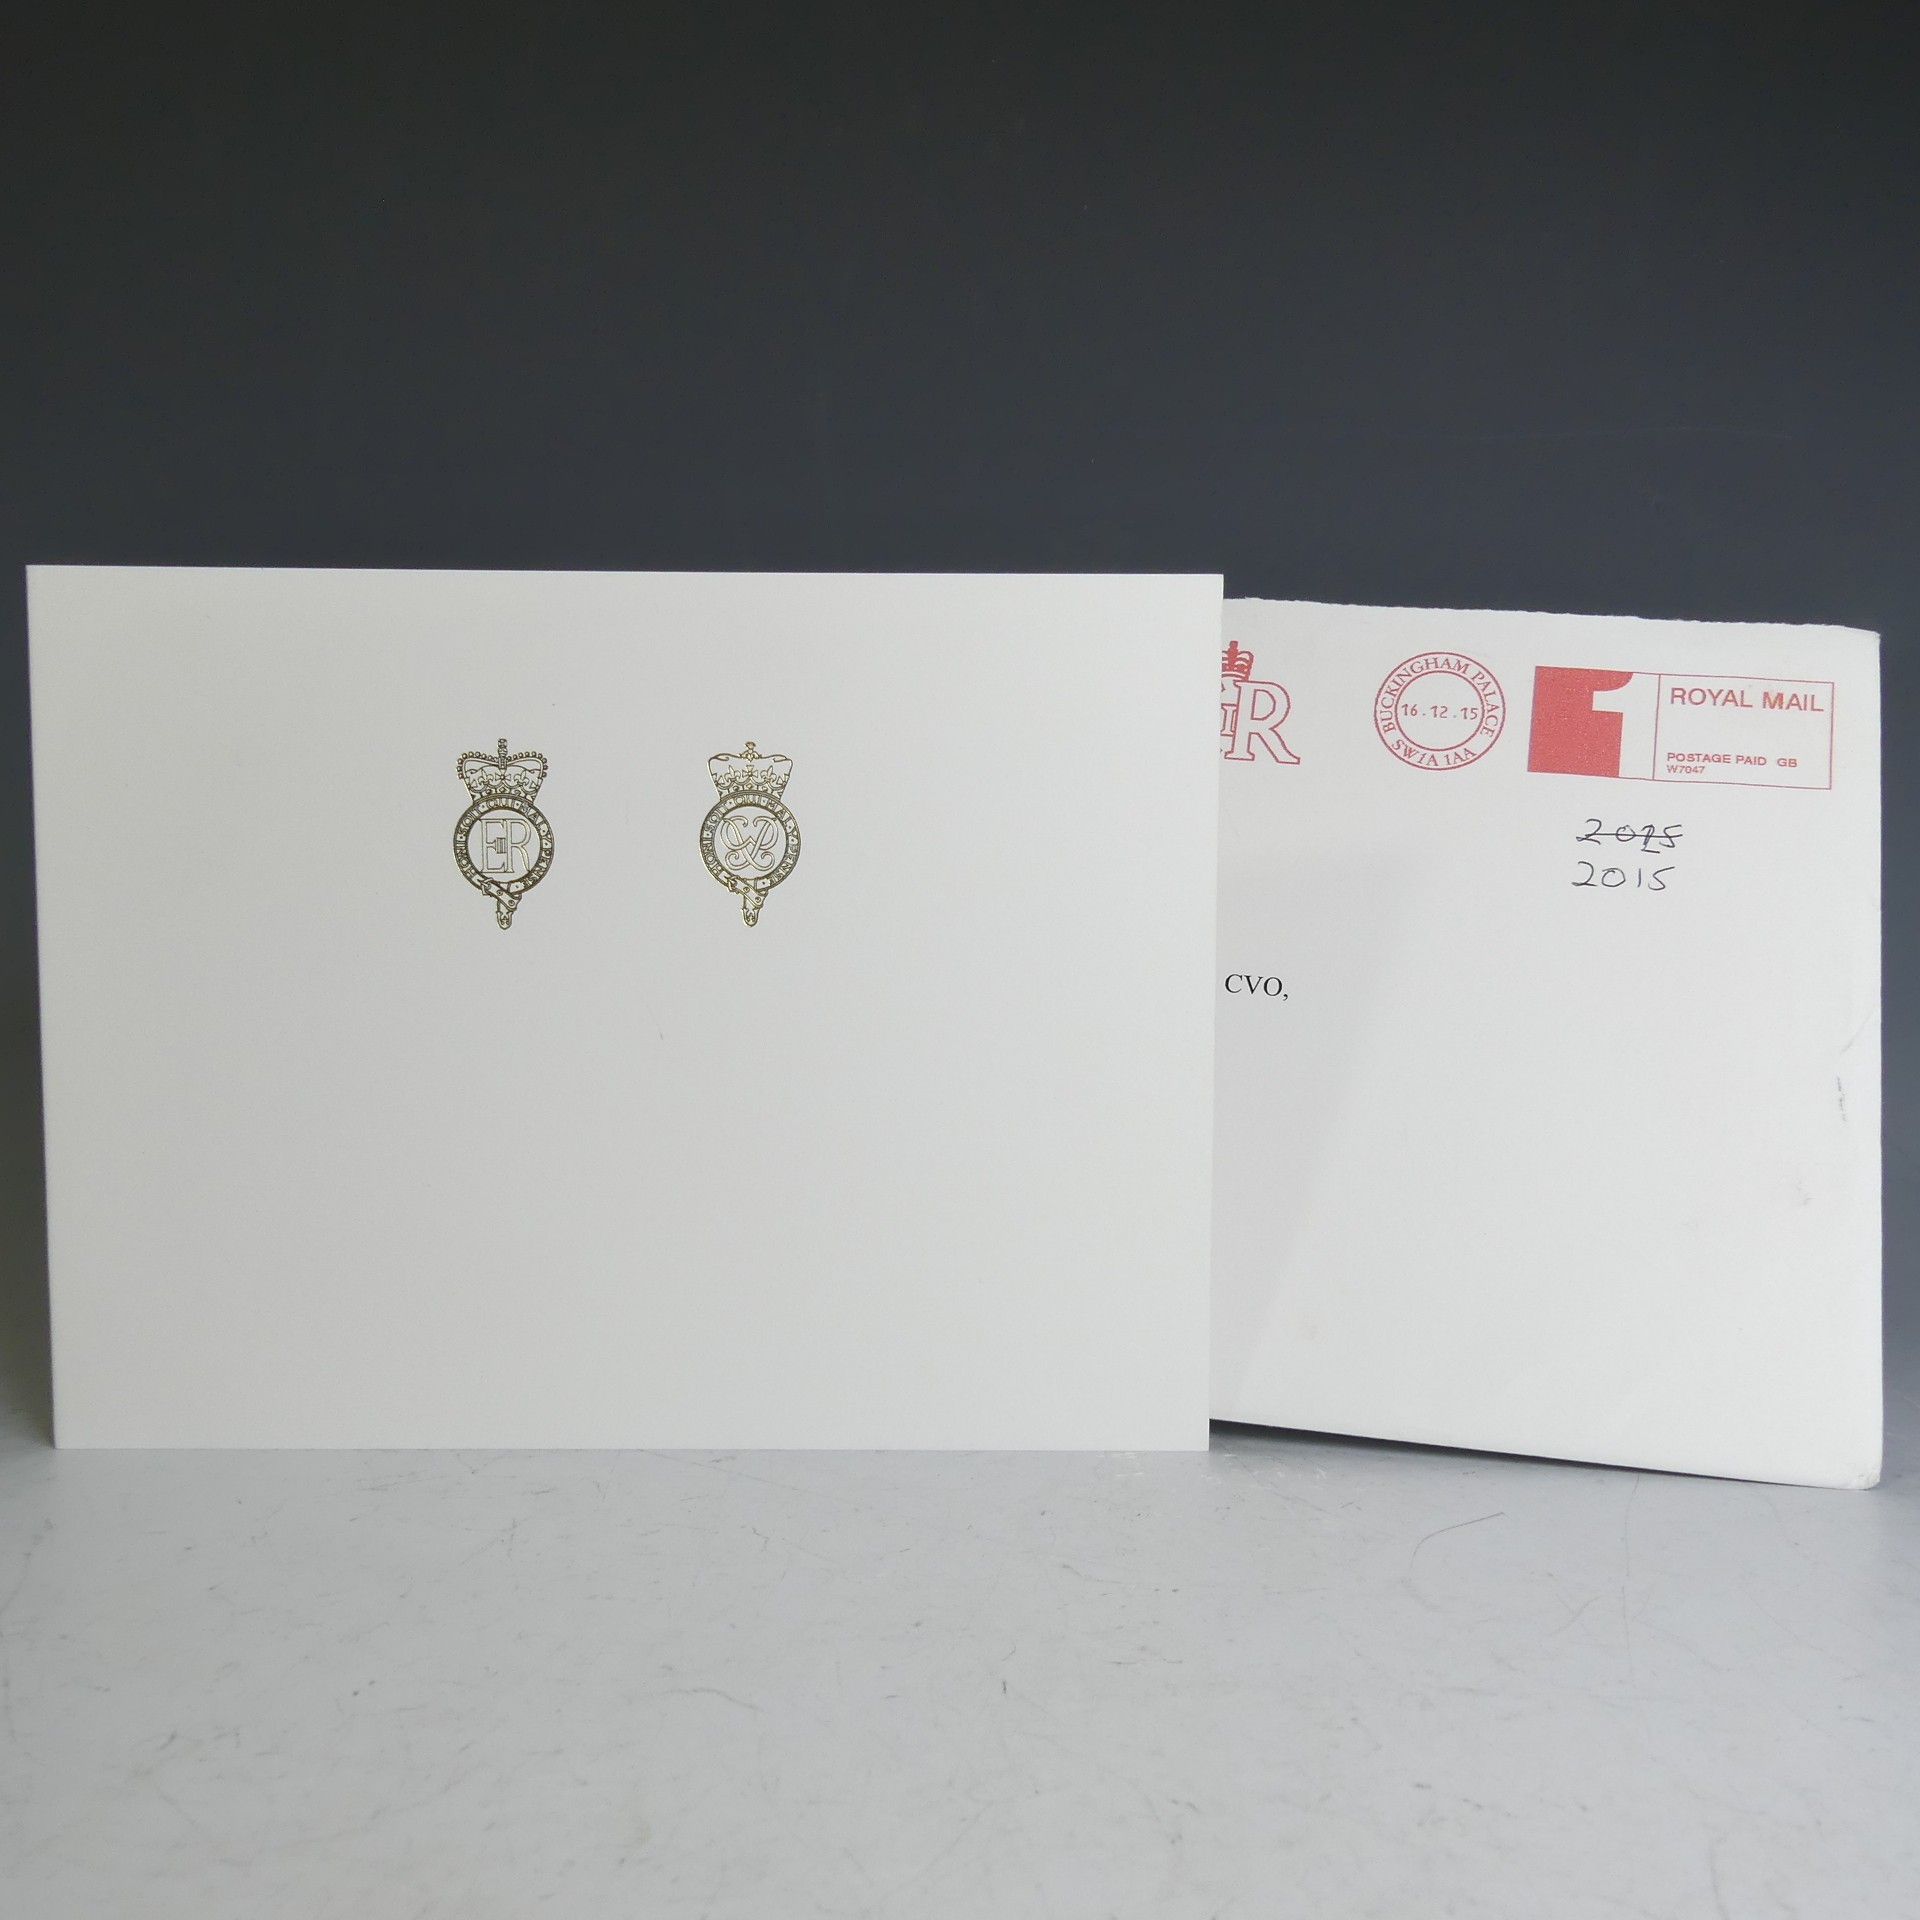 H.M.Queen Elizabeth II and H.R.H.The Duke of Edinburgh, signed 2015 Christmas card with twin gilt - Image 2 of 2